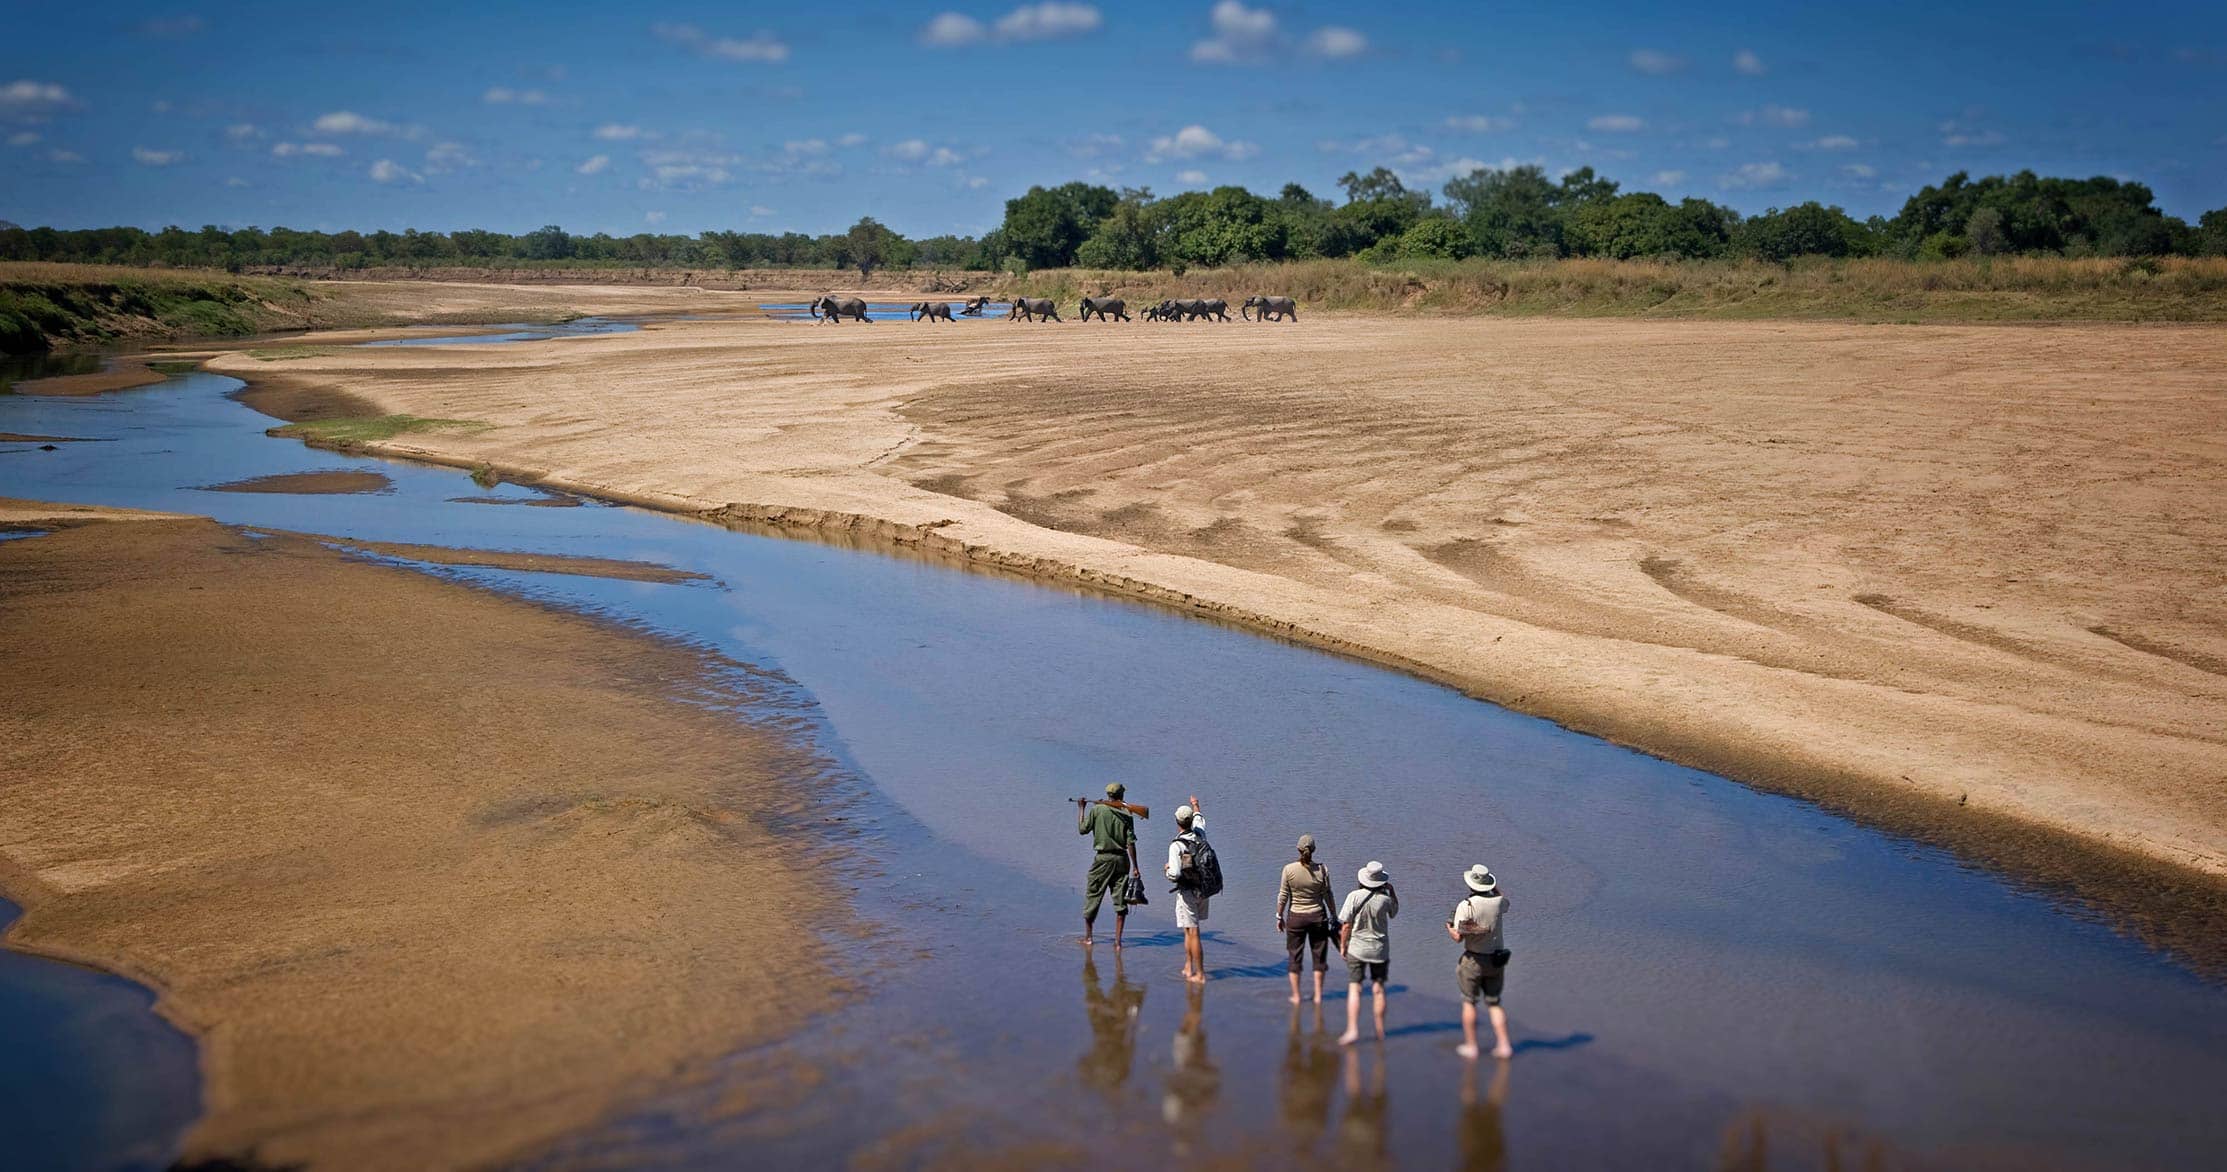 Some tourists in South Luangwa National Park